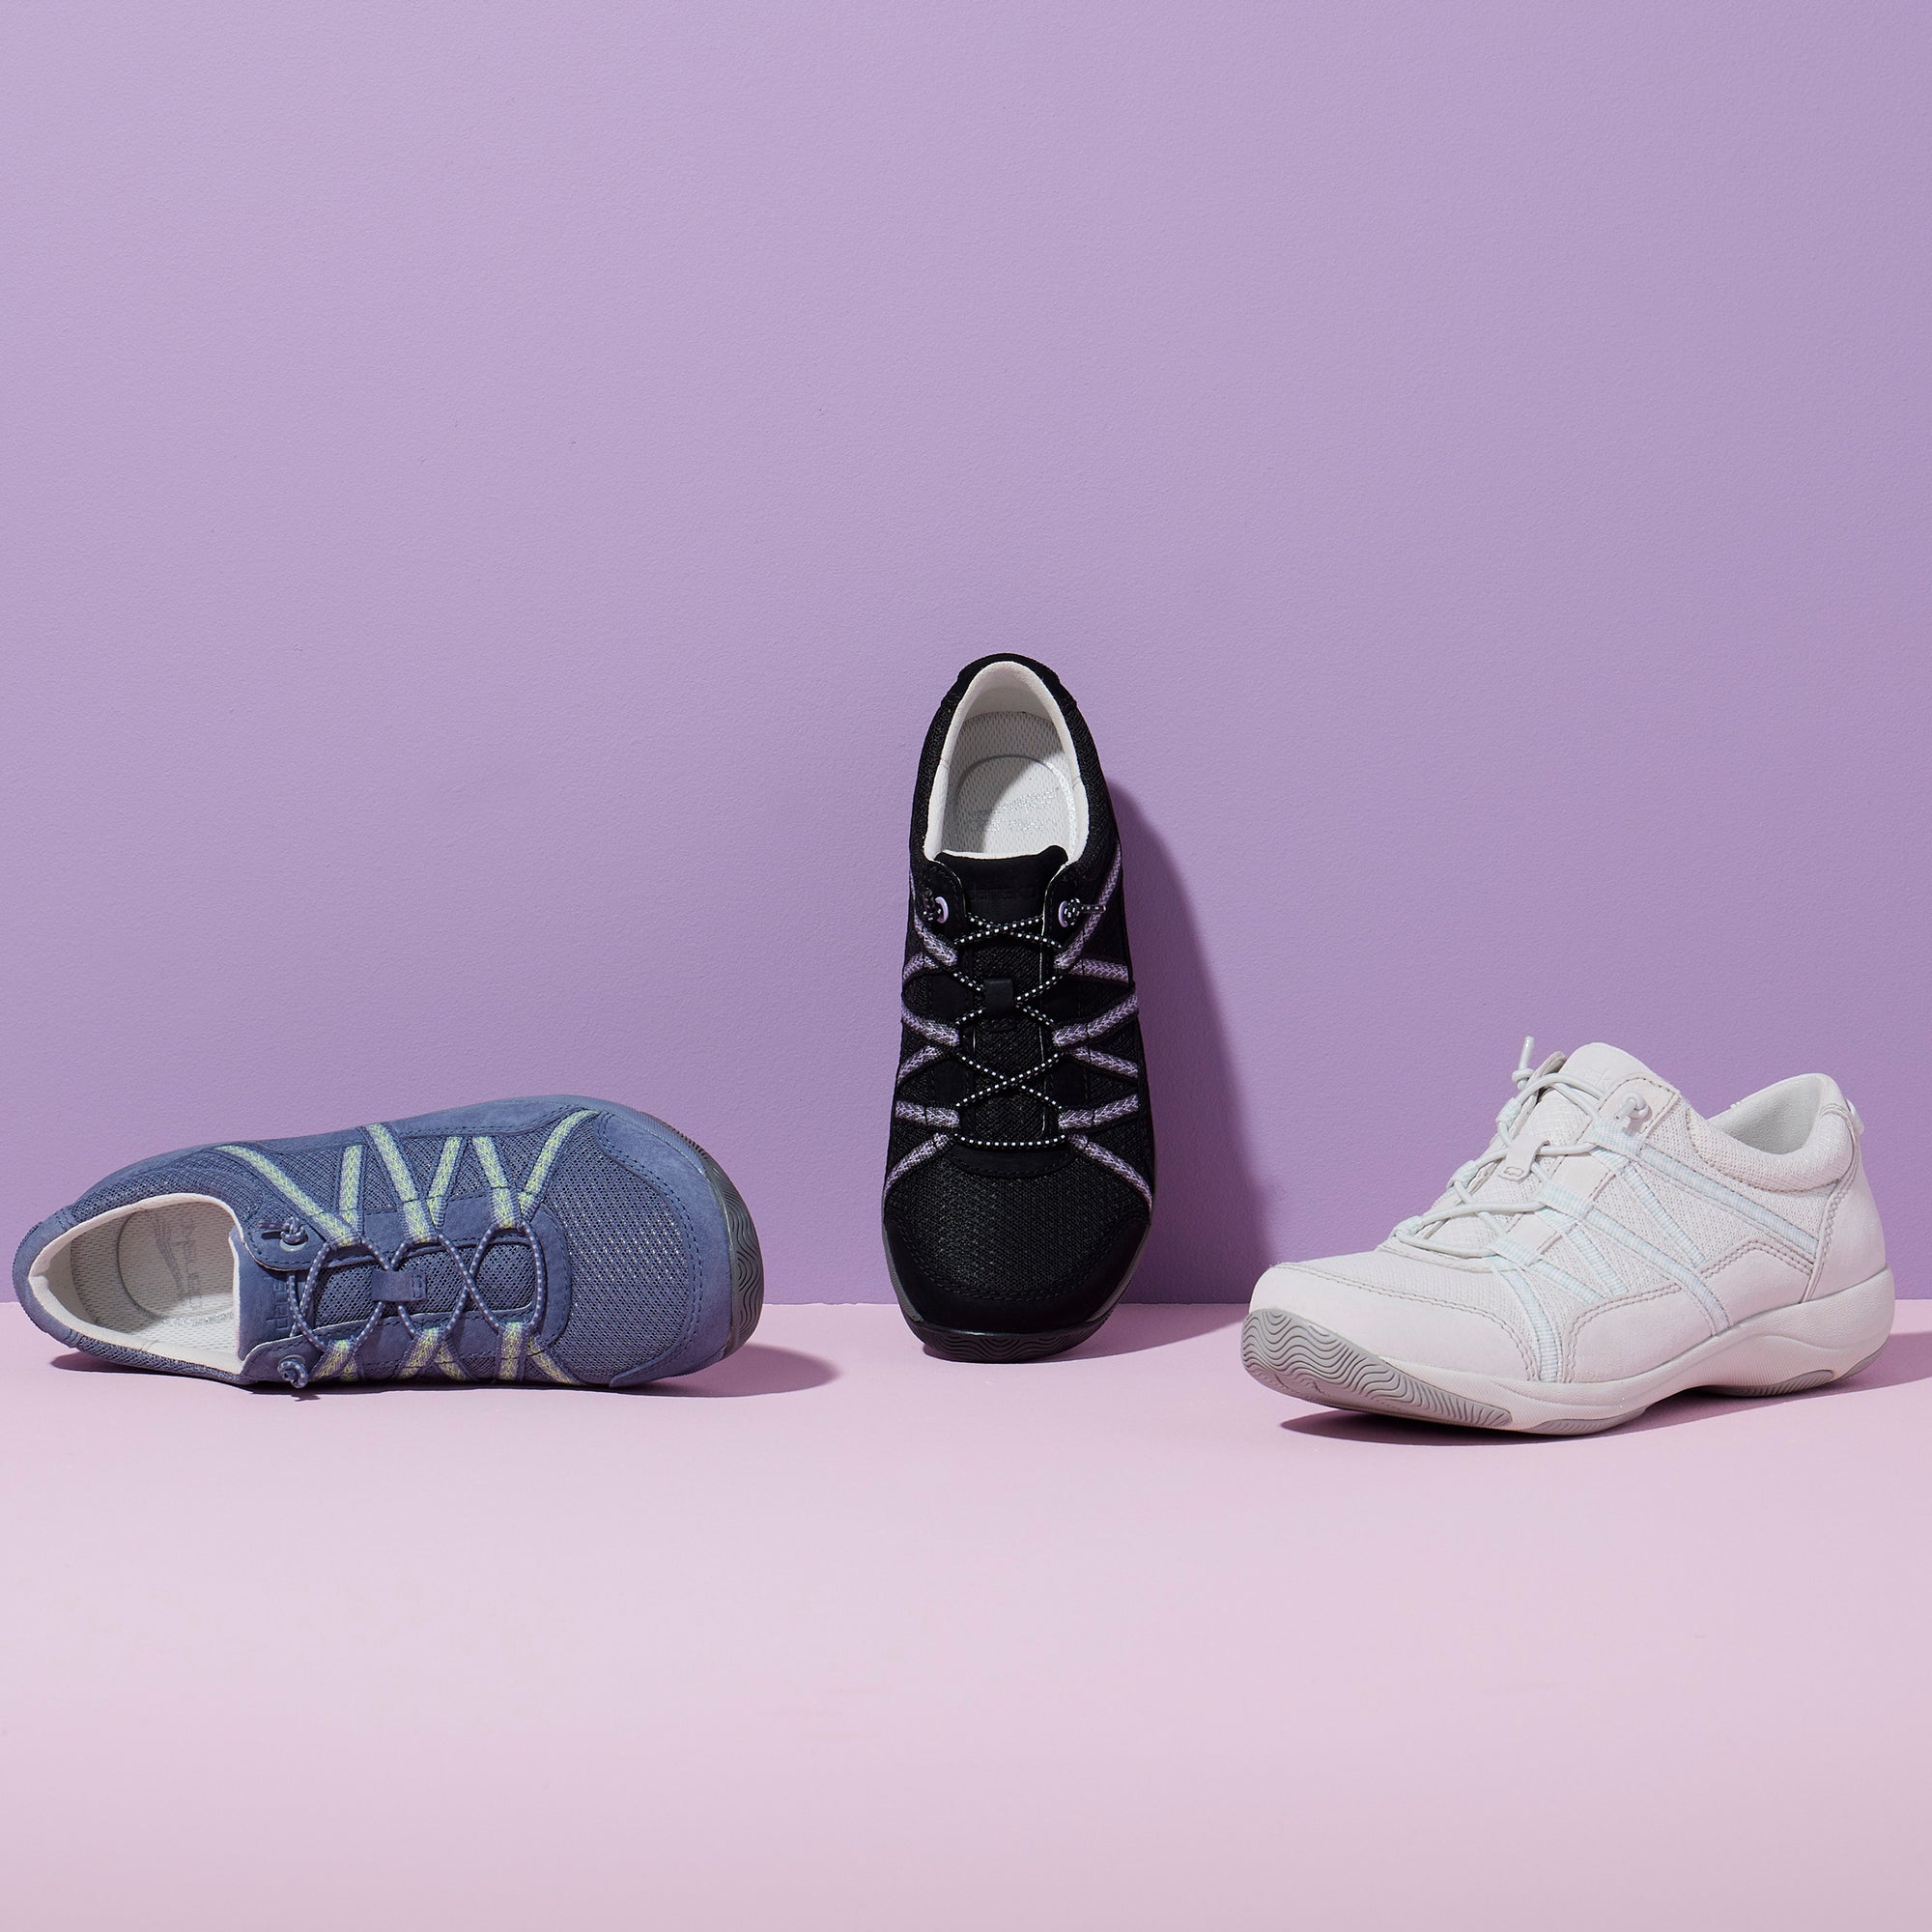 Three colors of a lightweight and breathable sneaker.